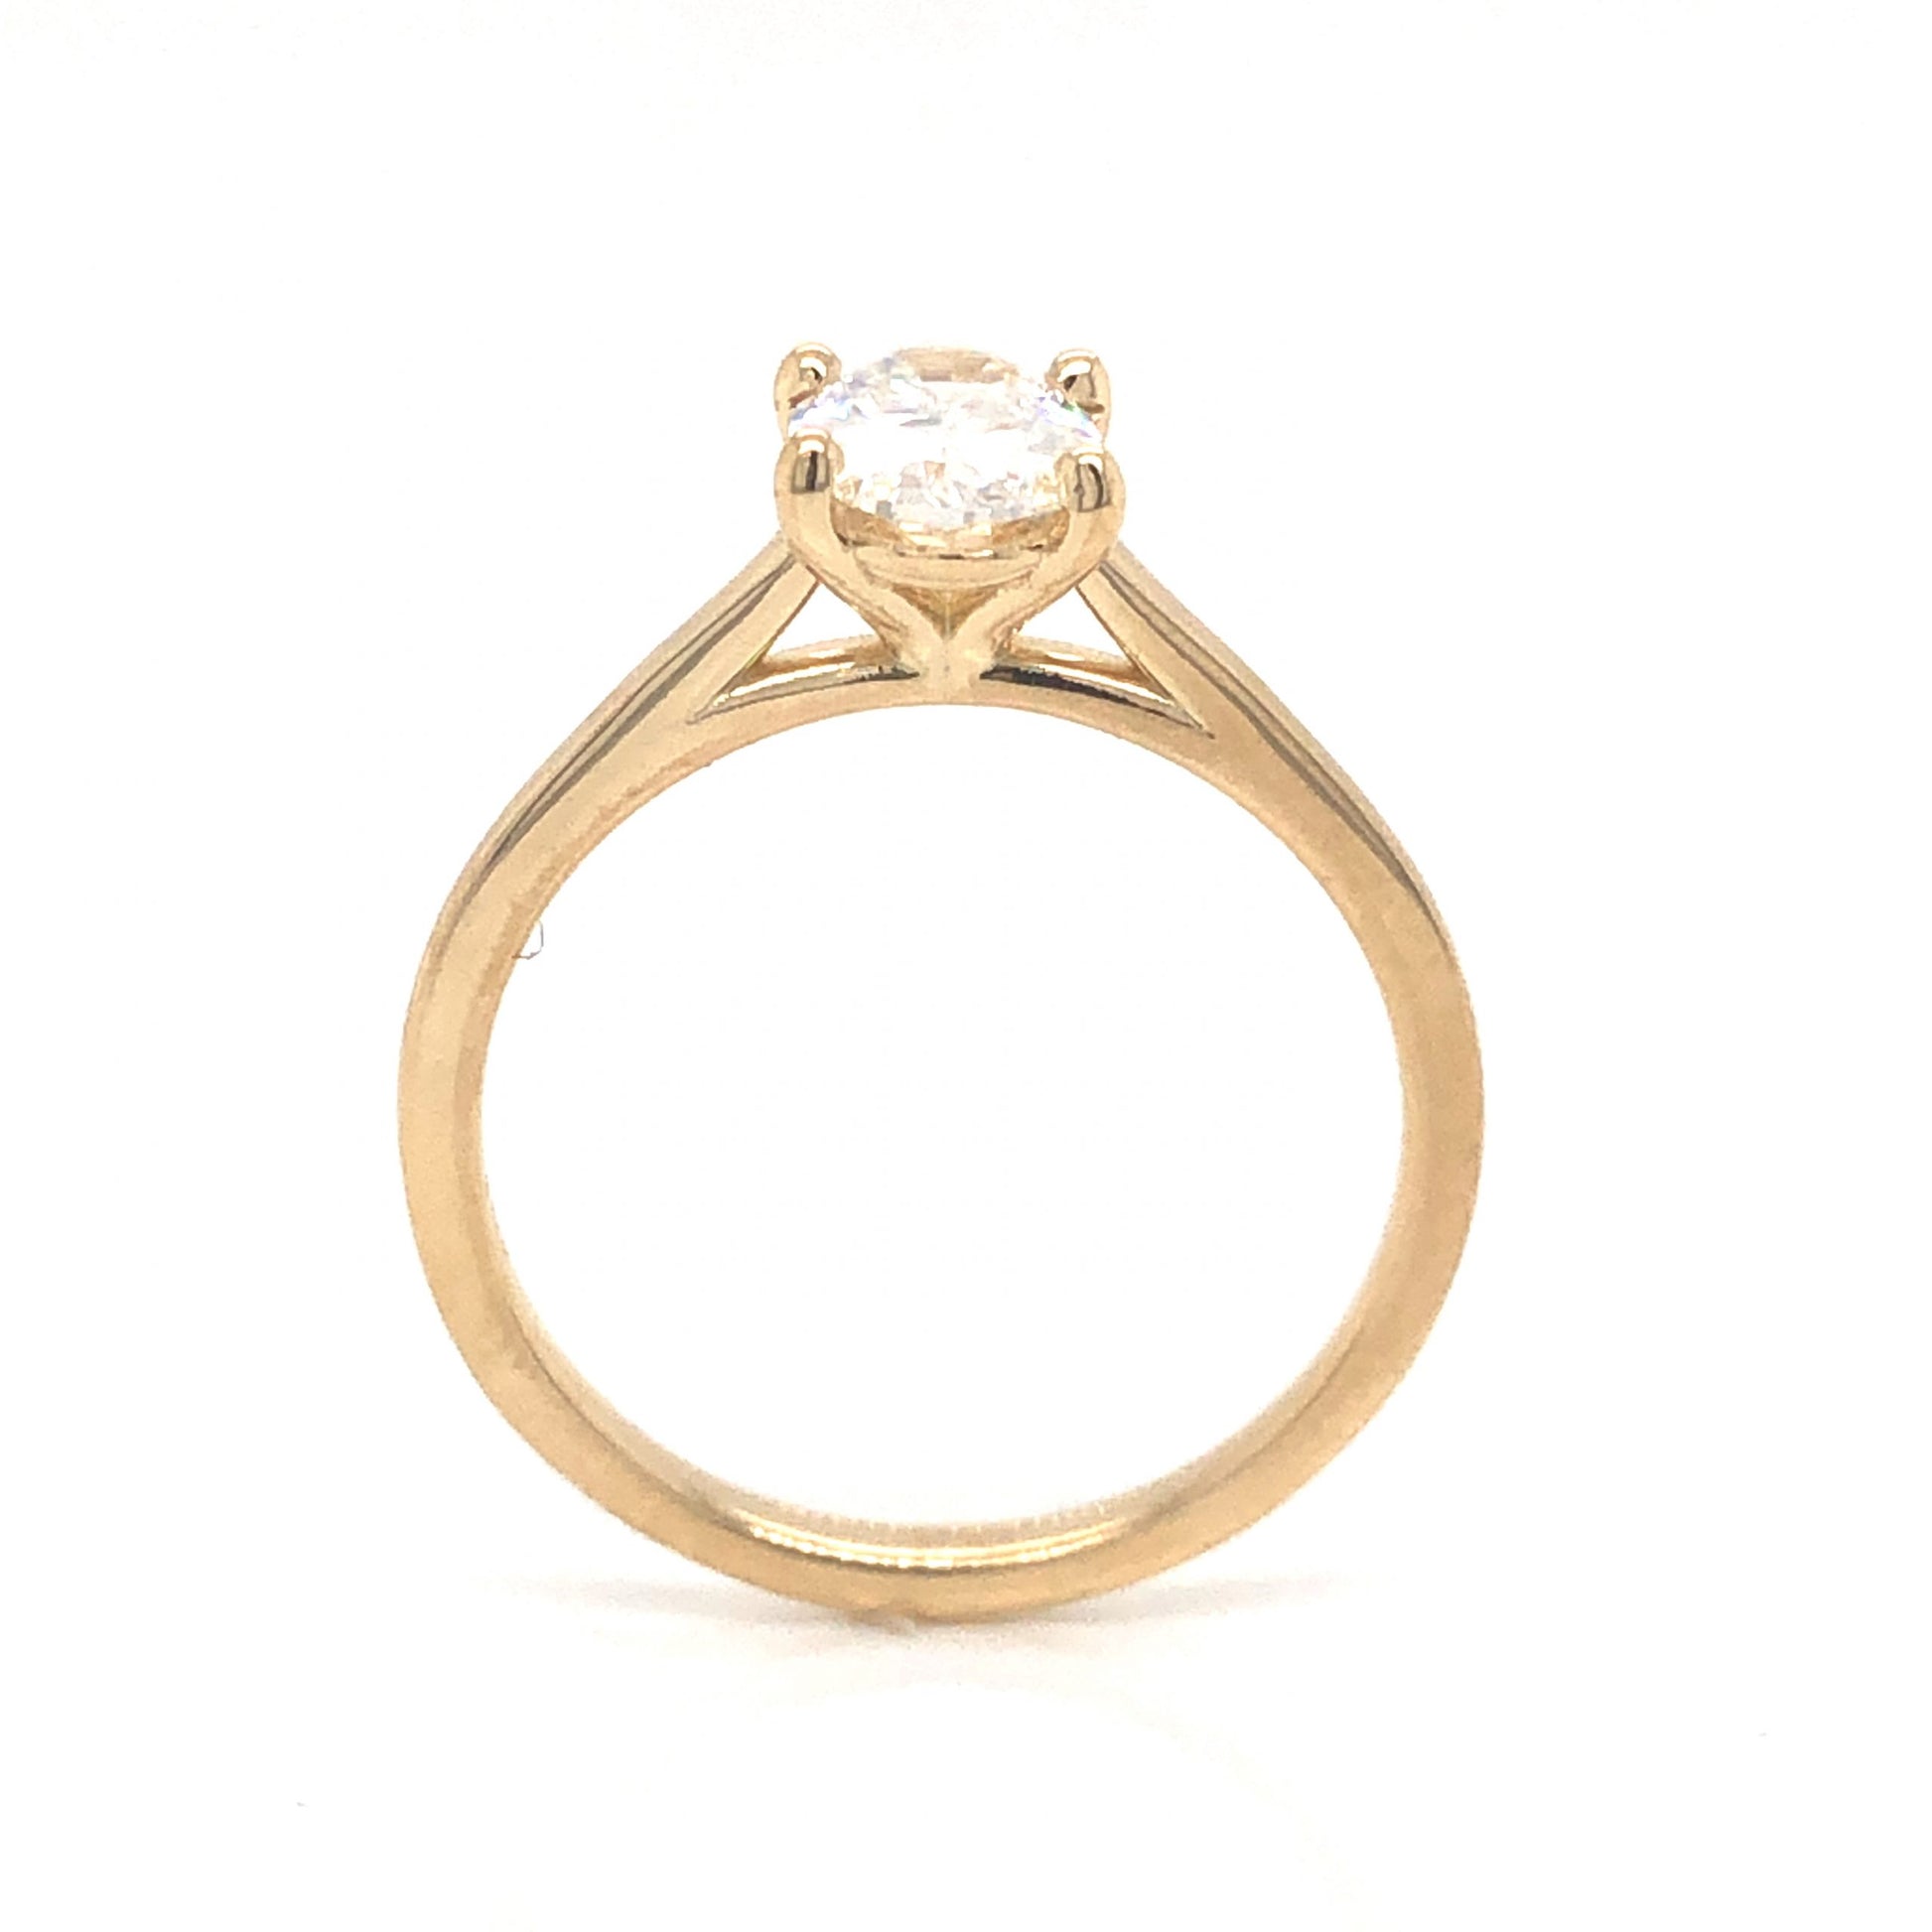 .92 Solitaire Oval Diamond Engagement Ring in 14k Yellow GoldComposition: Platinum Ring Size: 6.75 Total Diamond Weight: .92ct Total Gram Weight: 2.4 g Inscription: 14k
      